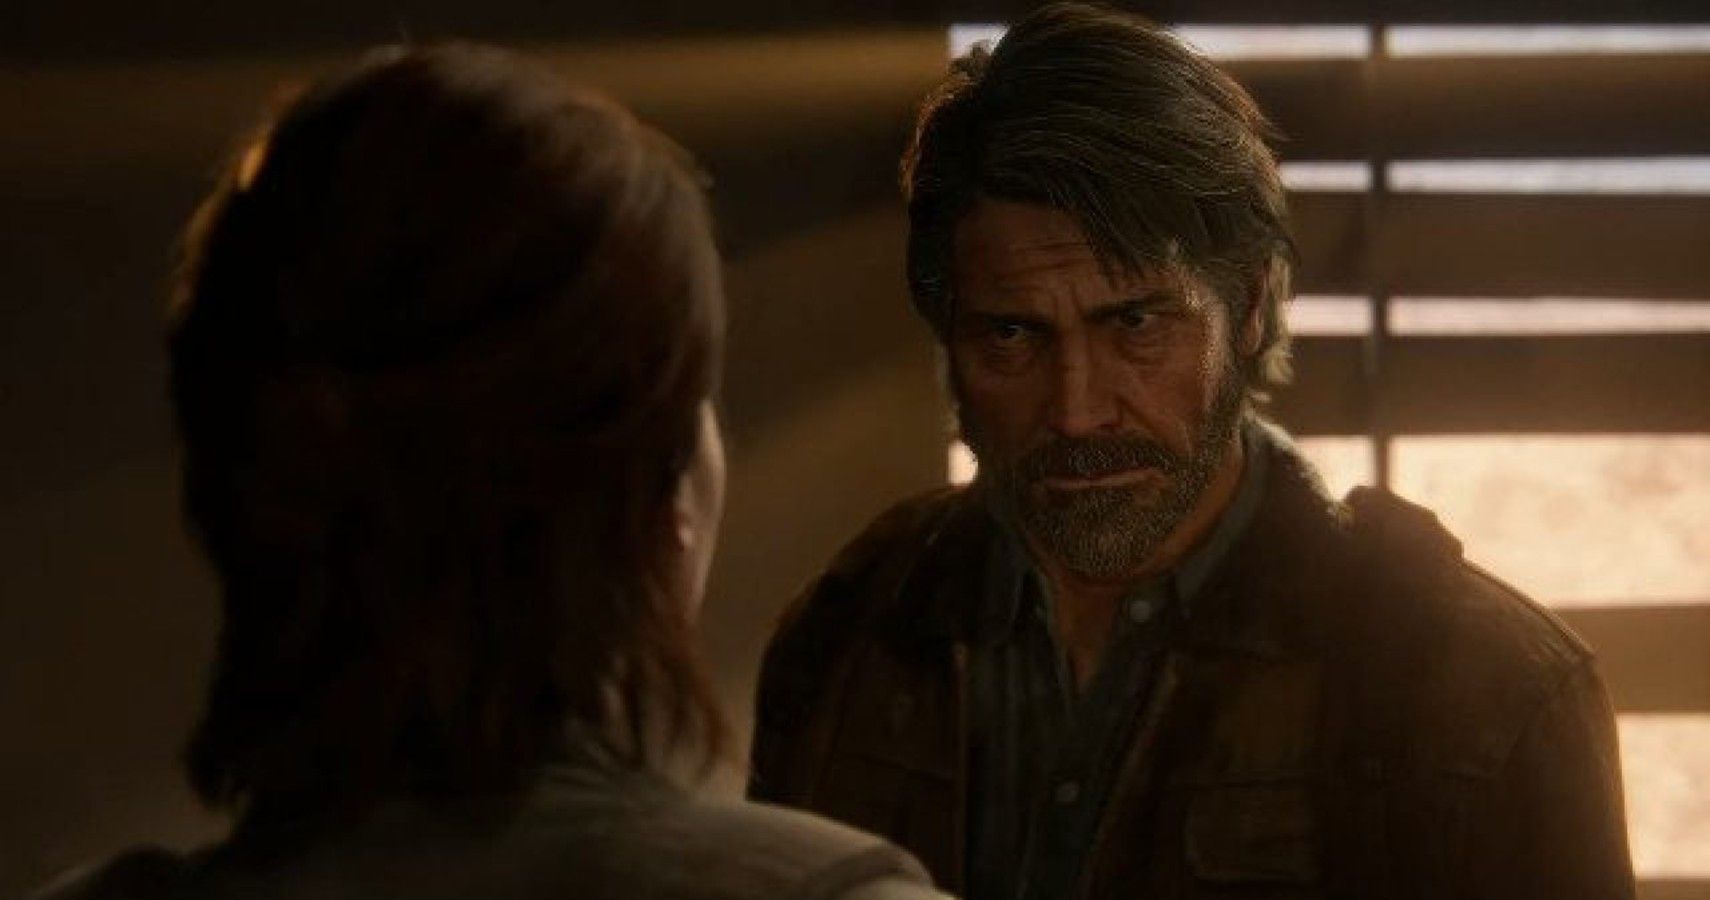 The Last of Us Part 2: What Does a Game Owe Its Player?